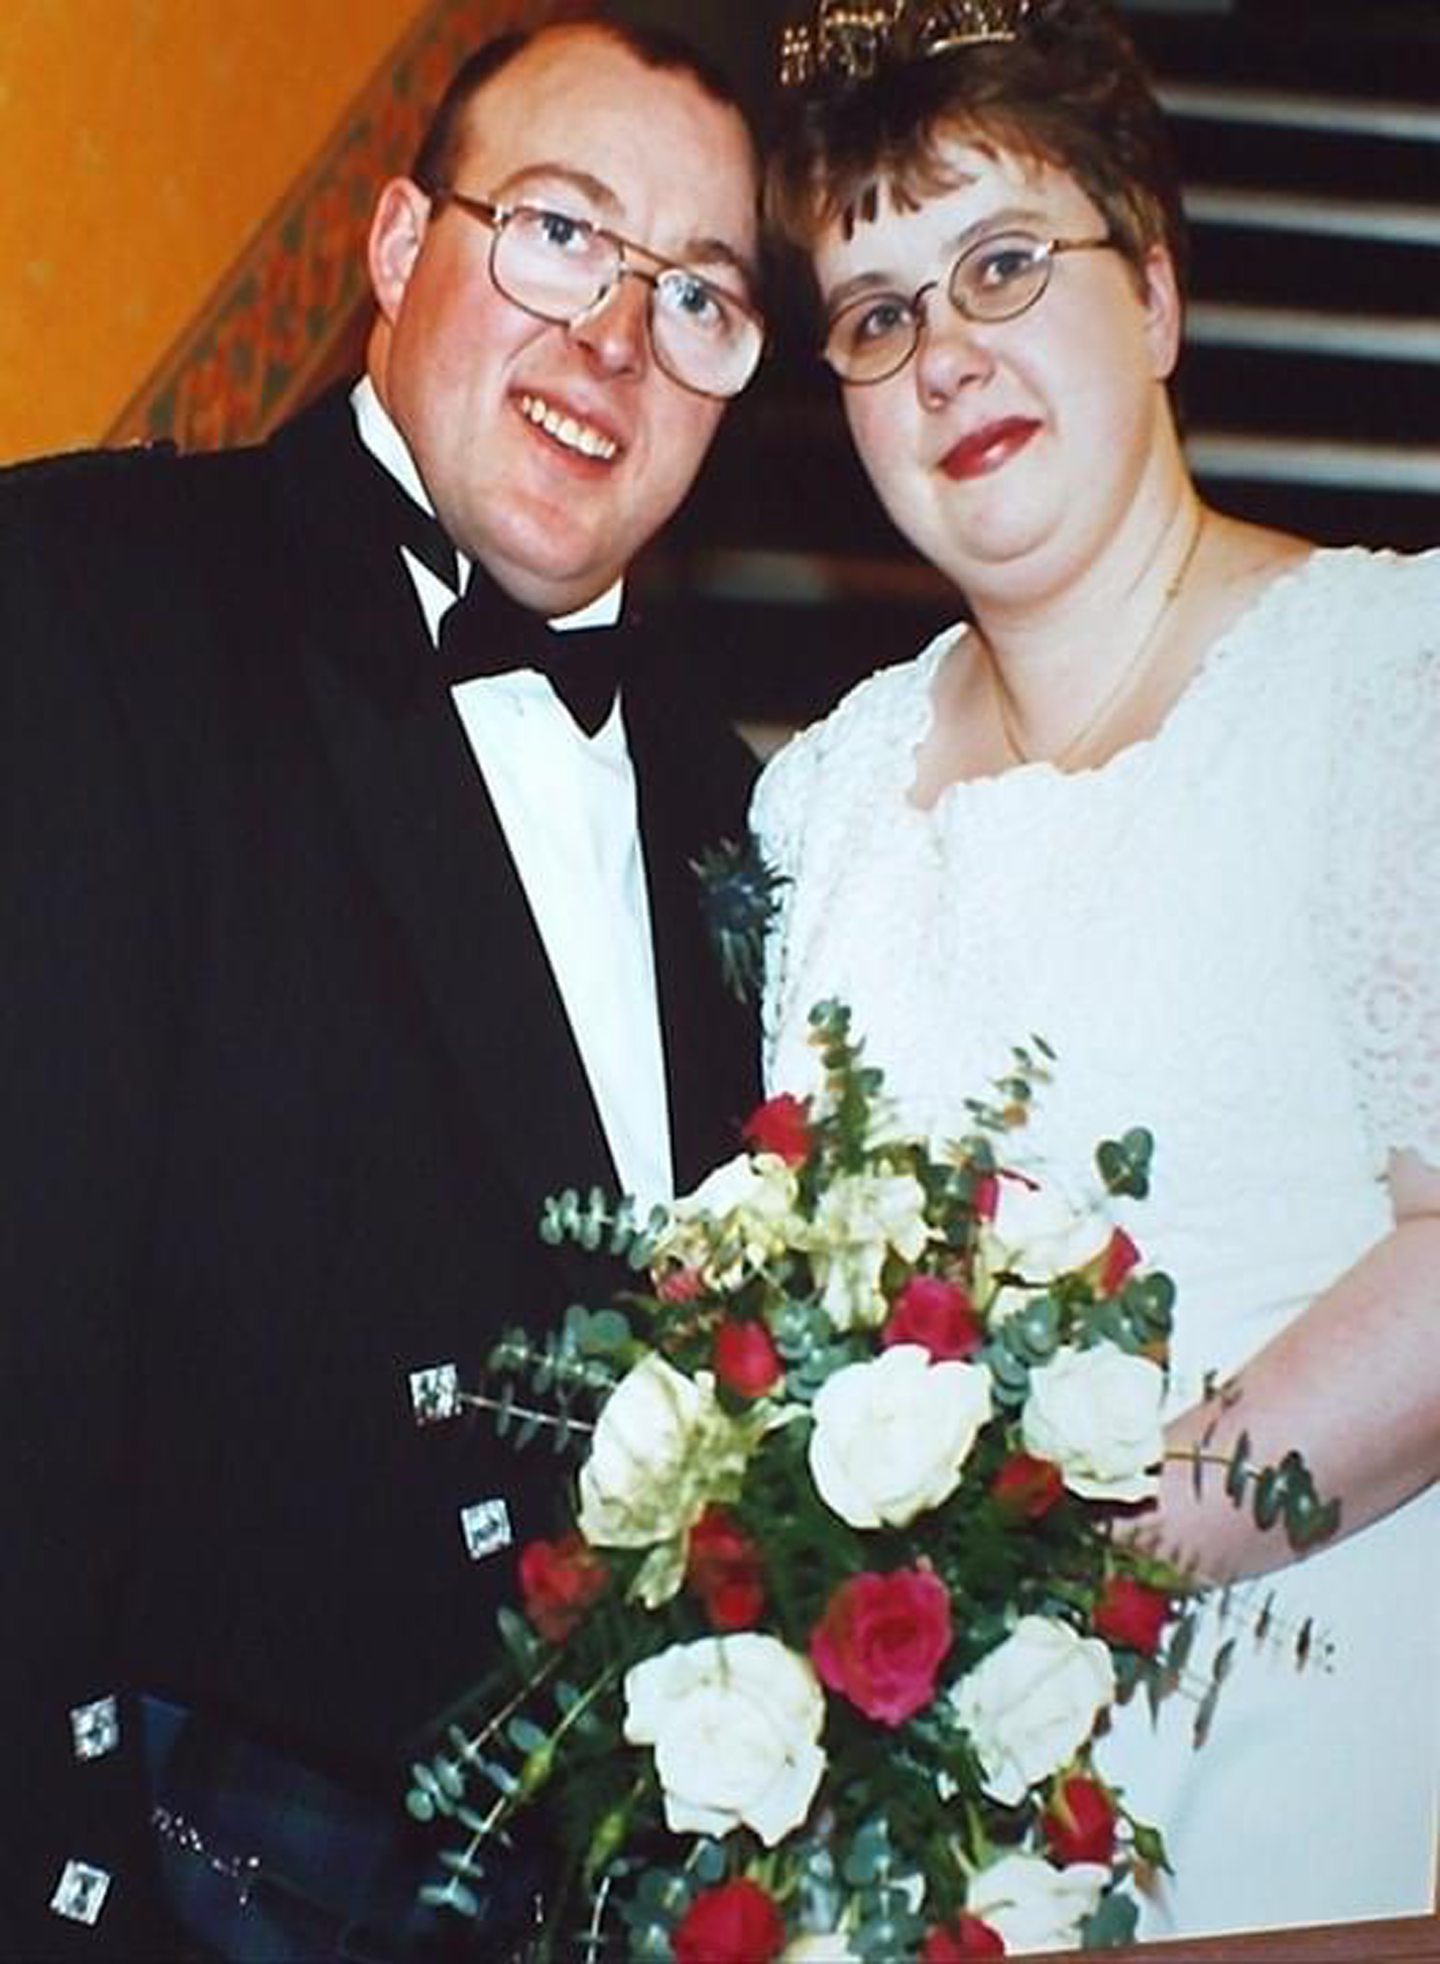 Ian Forbes and his wife Karen pictured on their wedding day.